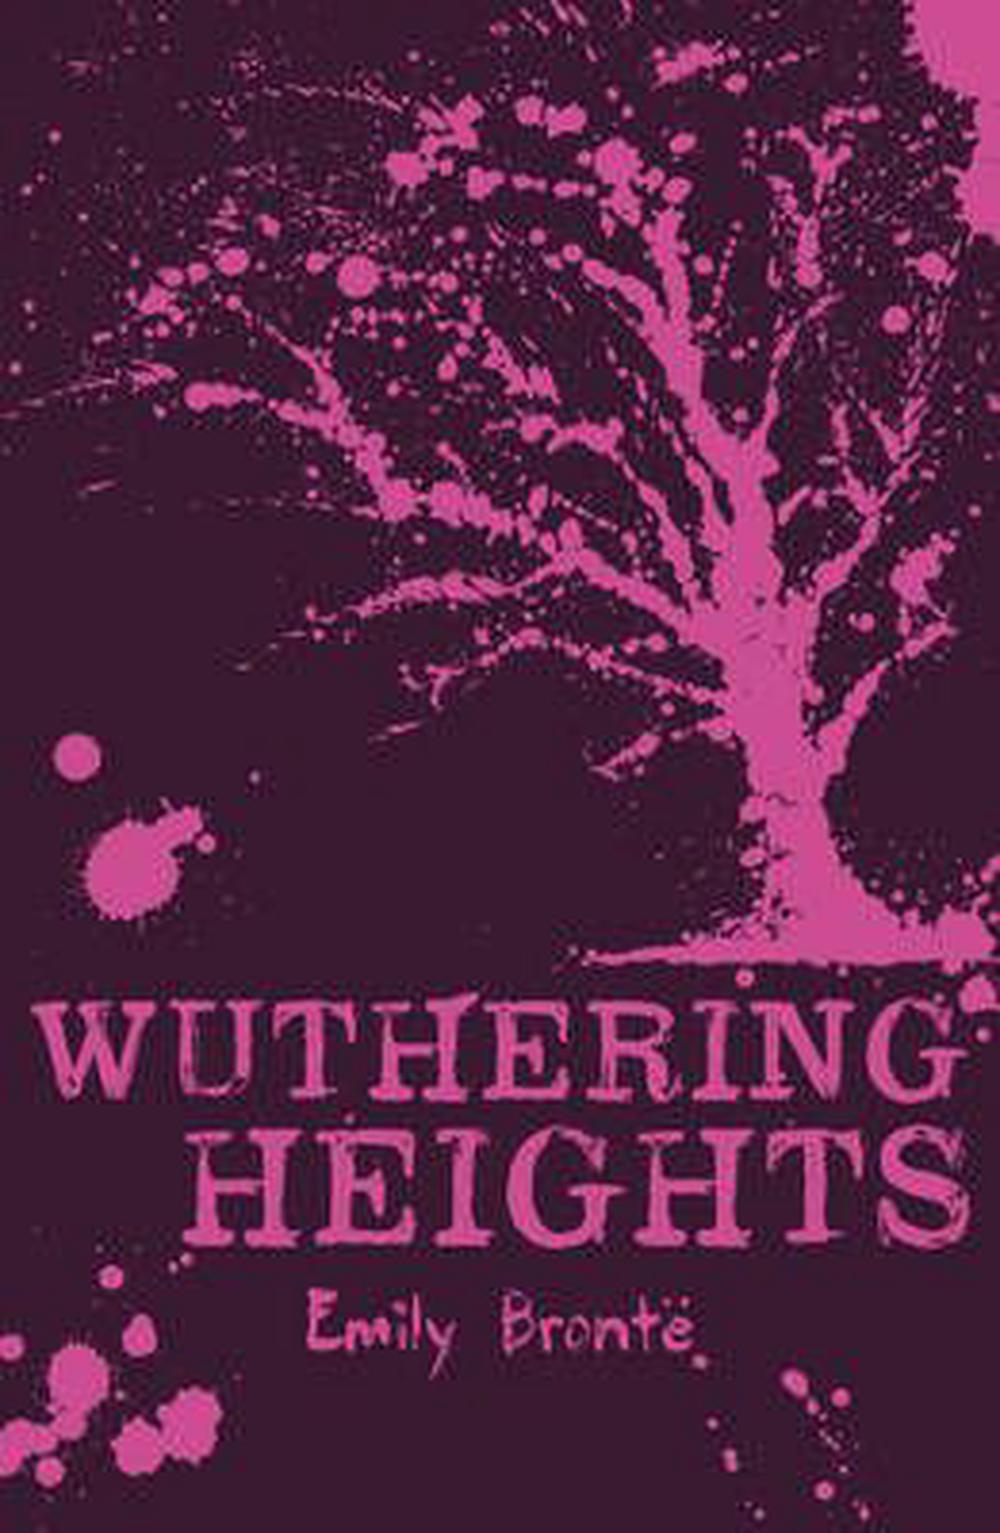 review of the book wuthering heights